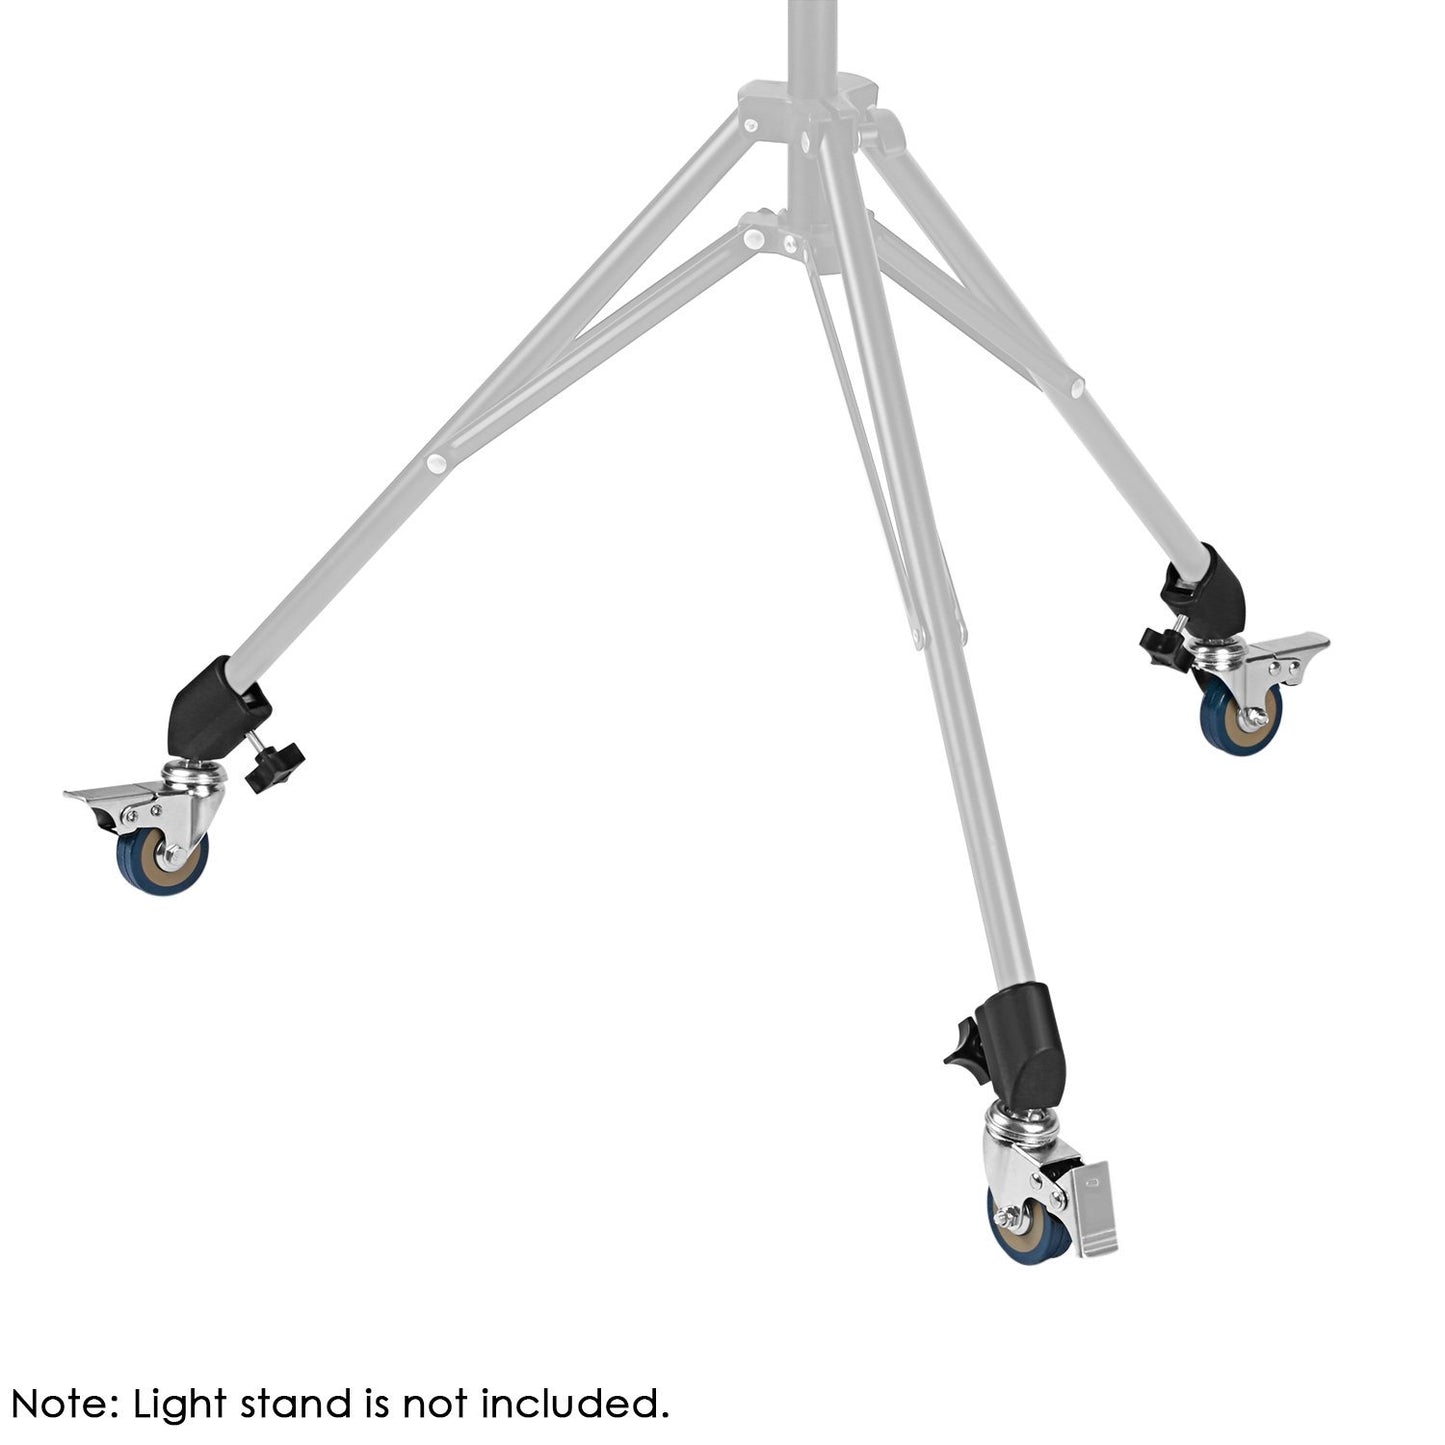 Pxel AA-TP 3pcs/set Photo Studio Heavy Duty Universal Caster Wheel for Tripod or Light Stands